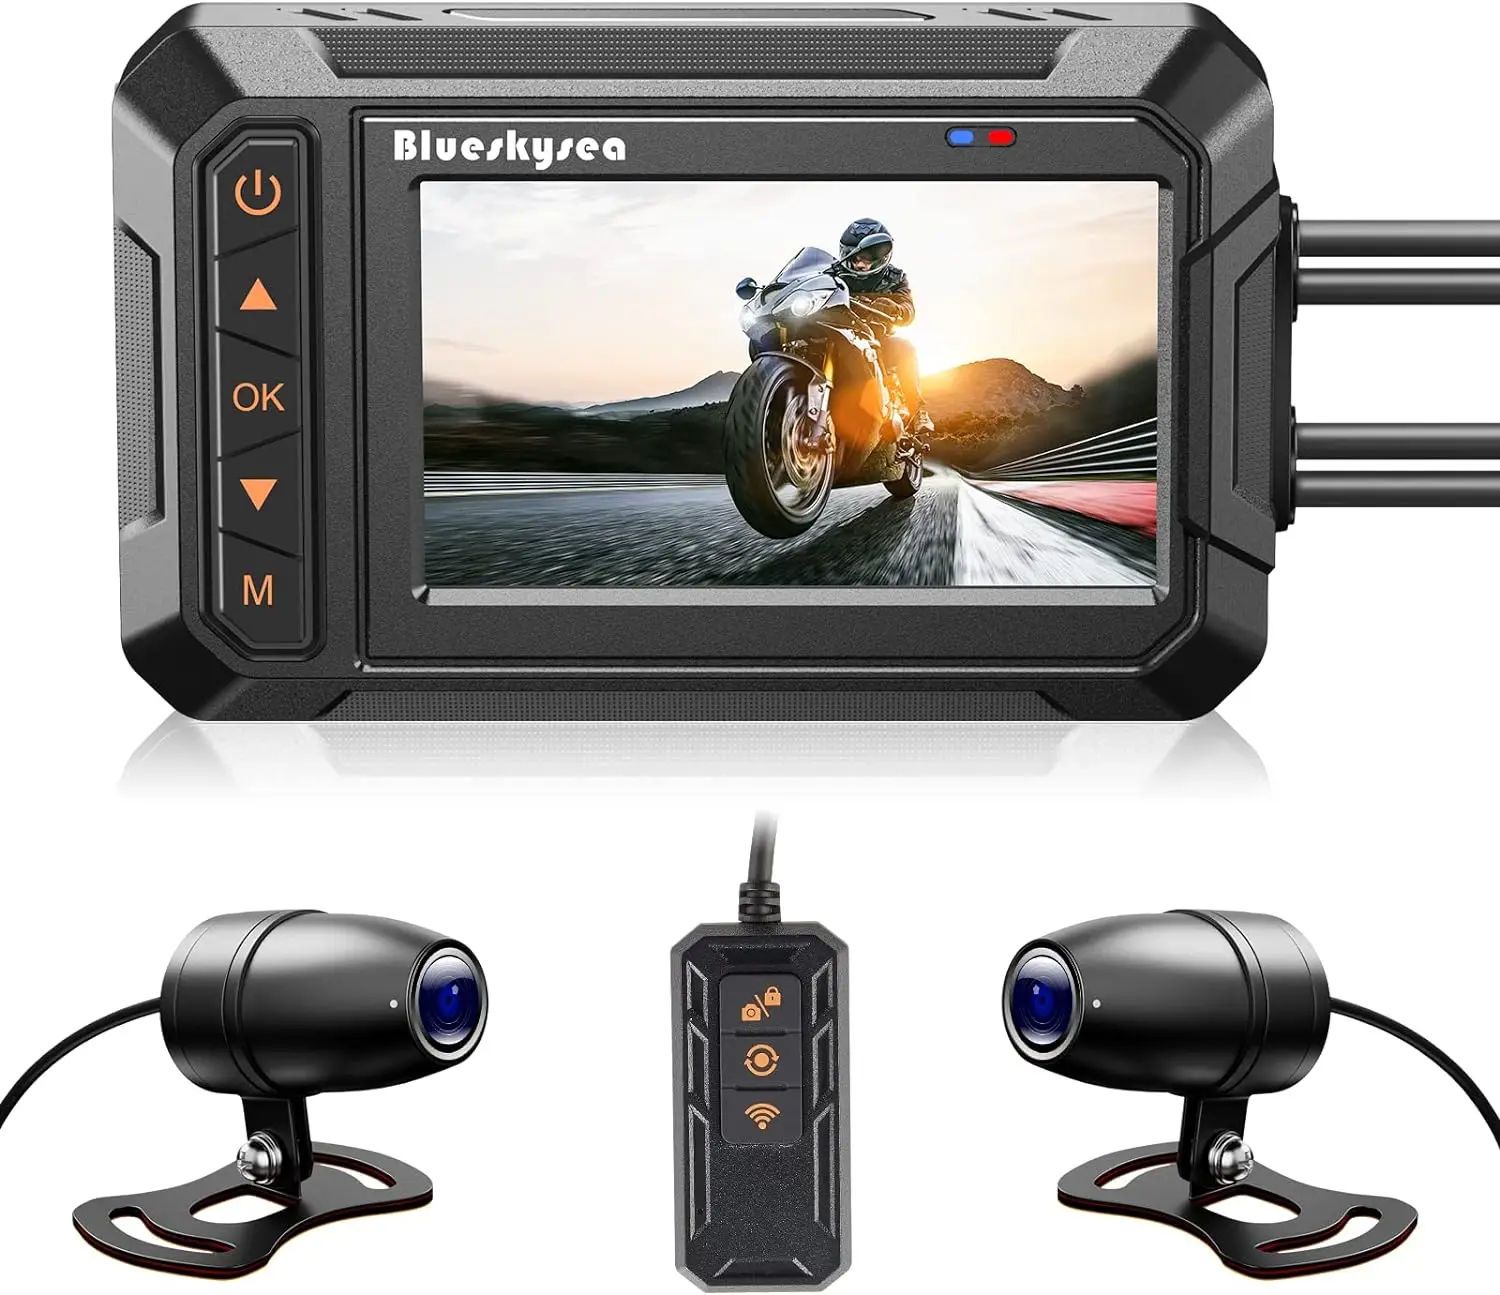 

Motorcycle Dash Cam Camera, Blueskysea B5M 2K 30fps Dual Wide Angle 150° Lens Sportbike Recording DVR with 3'' IPS Screen